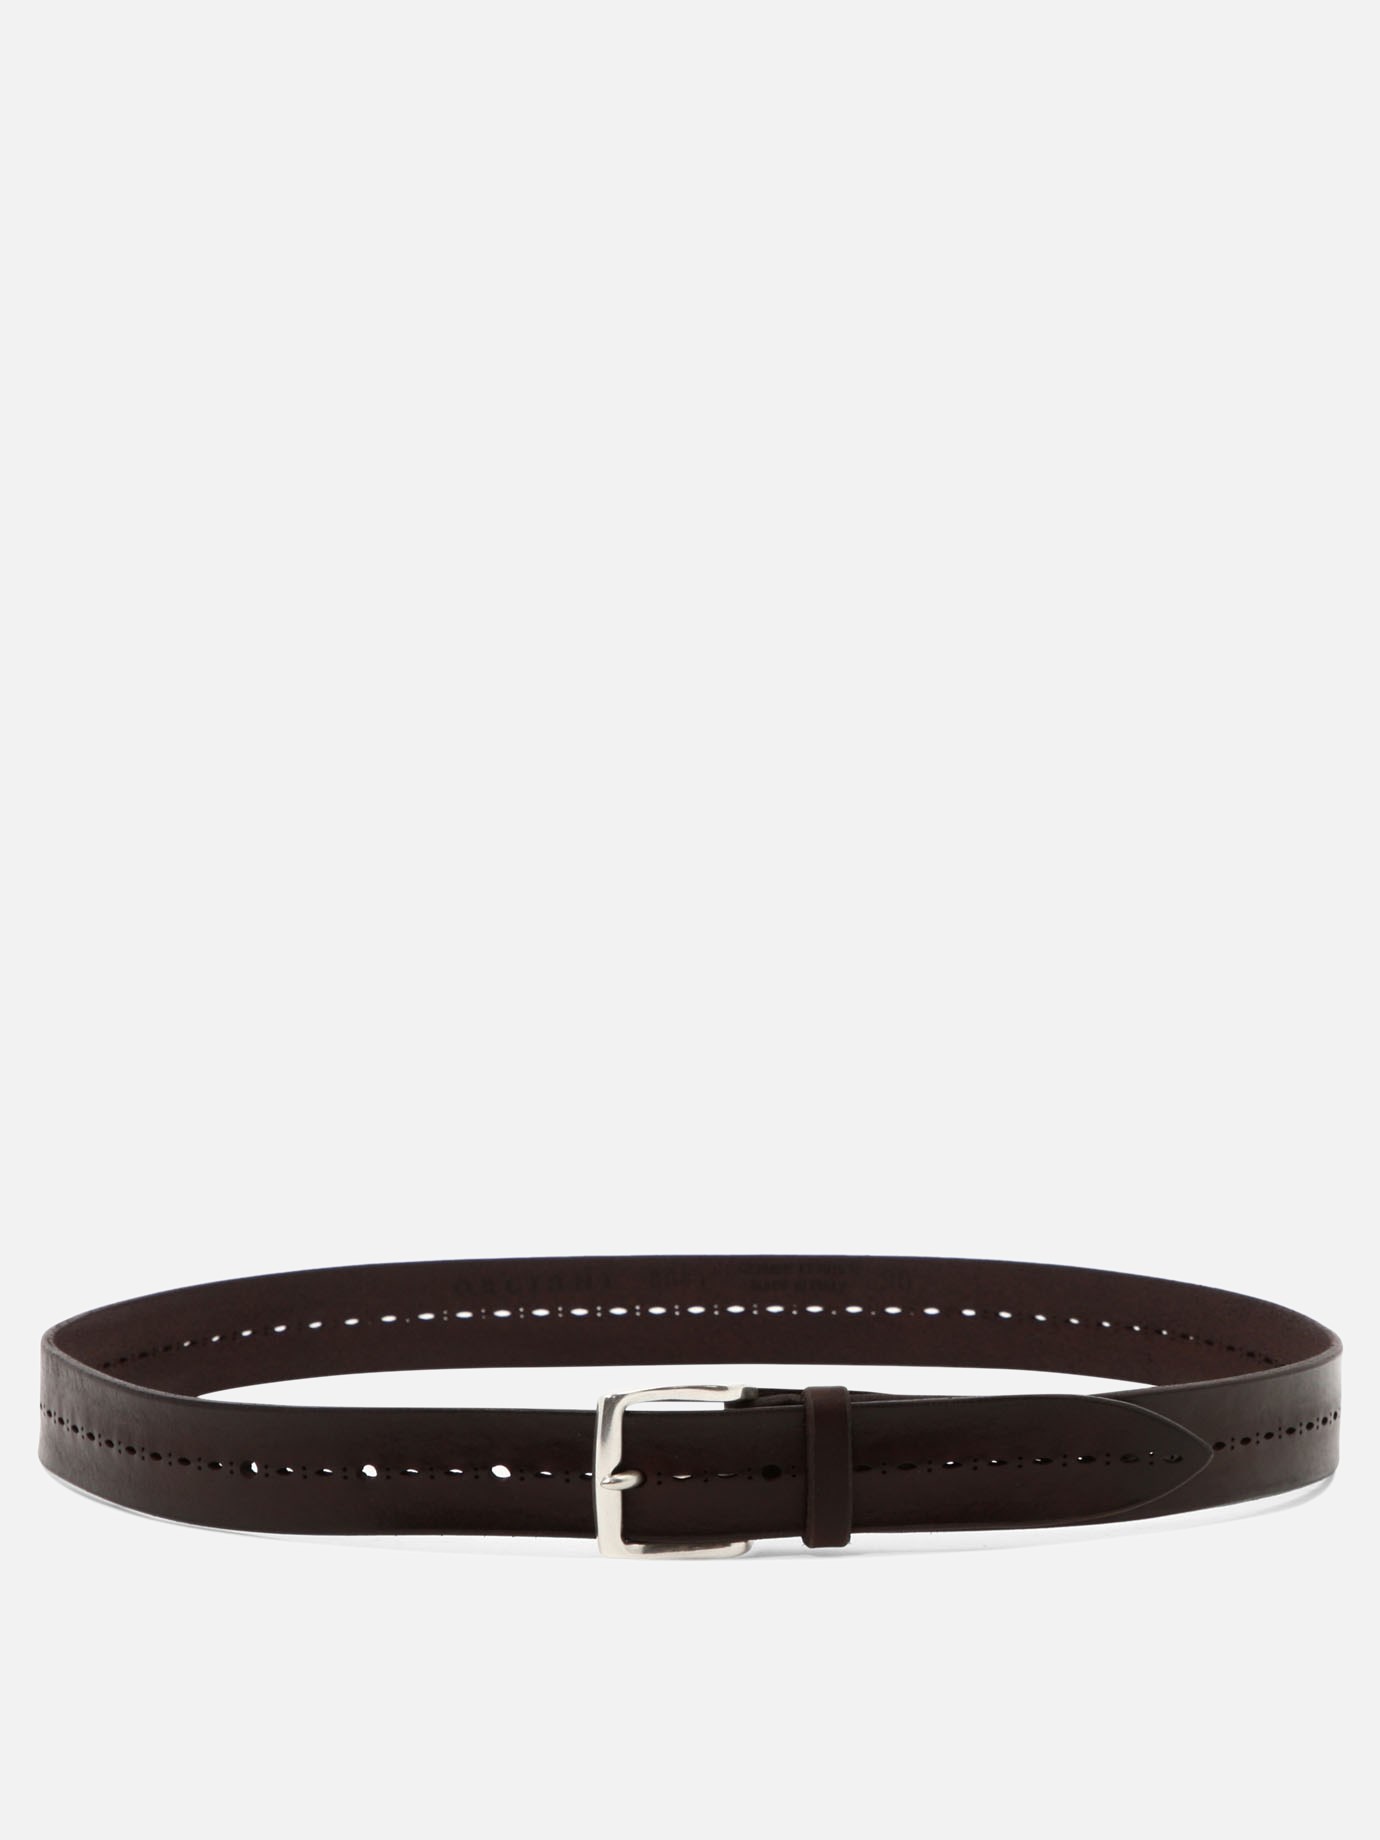  Bull Soft  beltby Orciani - 2